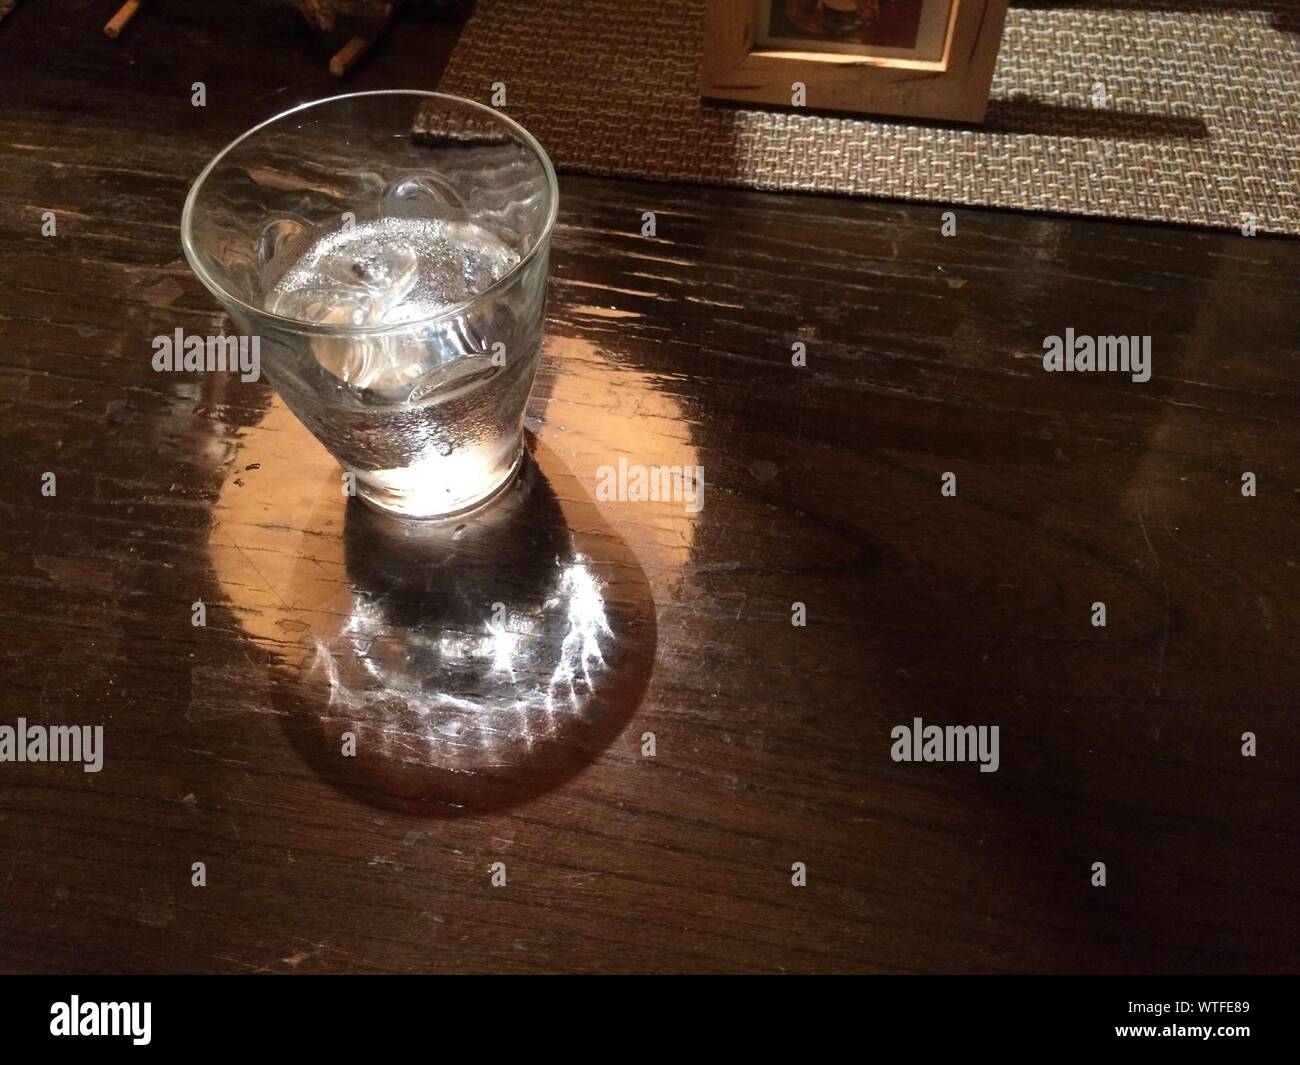 High Angle View Of Half Full Glass On Table Stock Photo